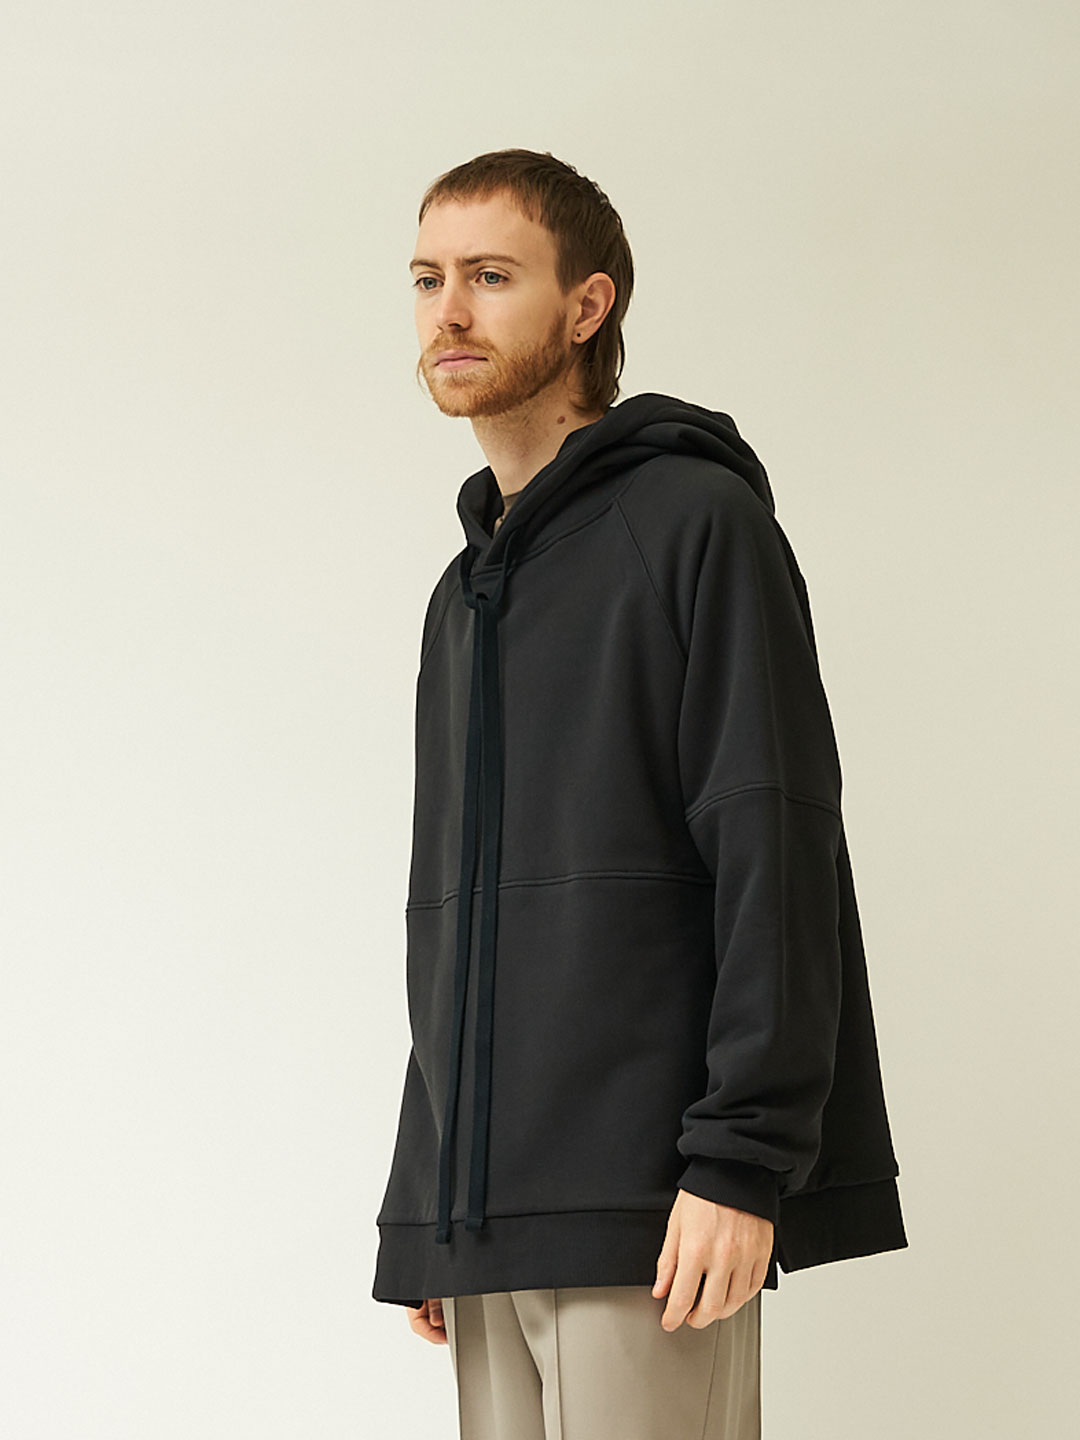 The Forager Top / Flint - Black